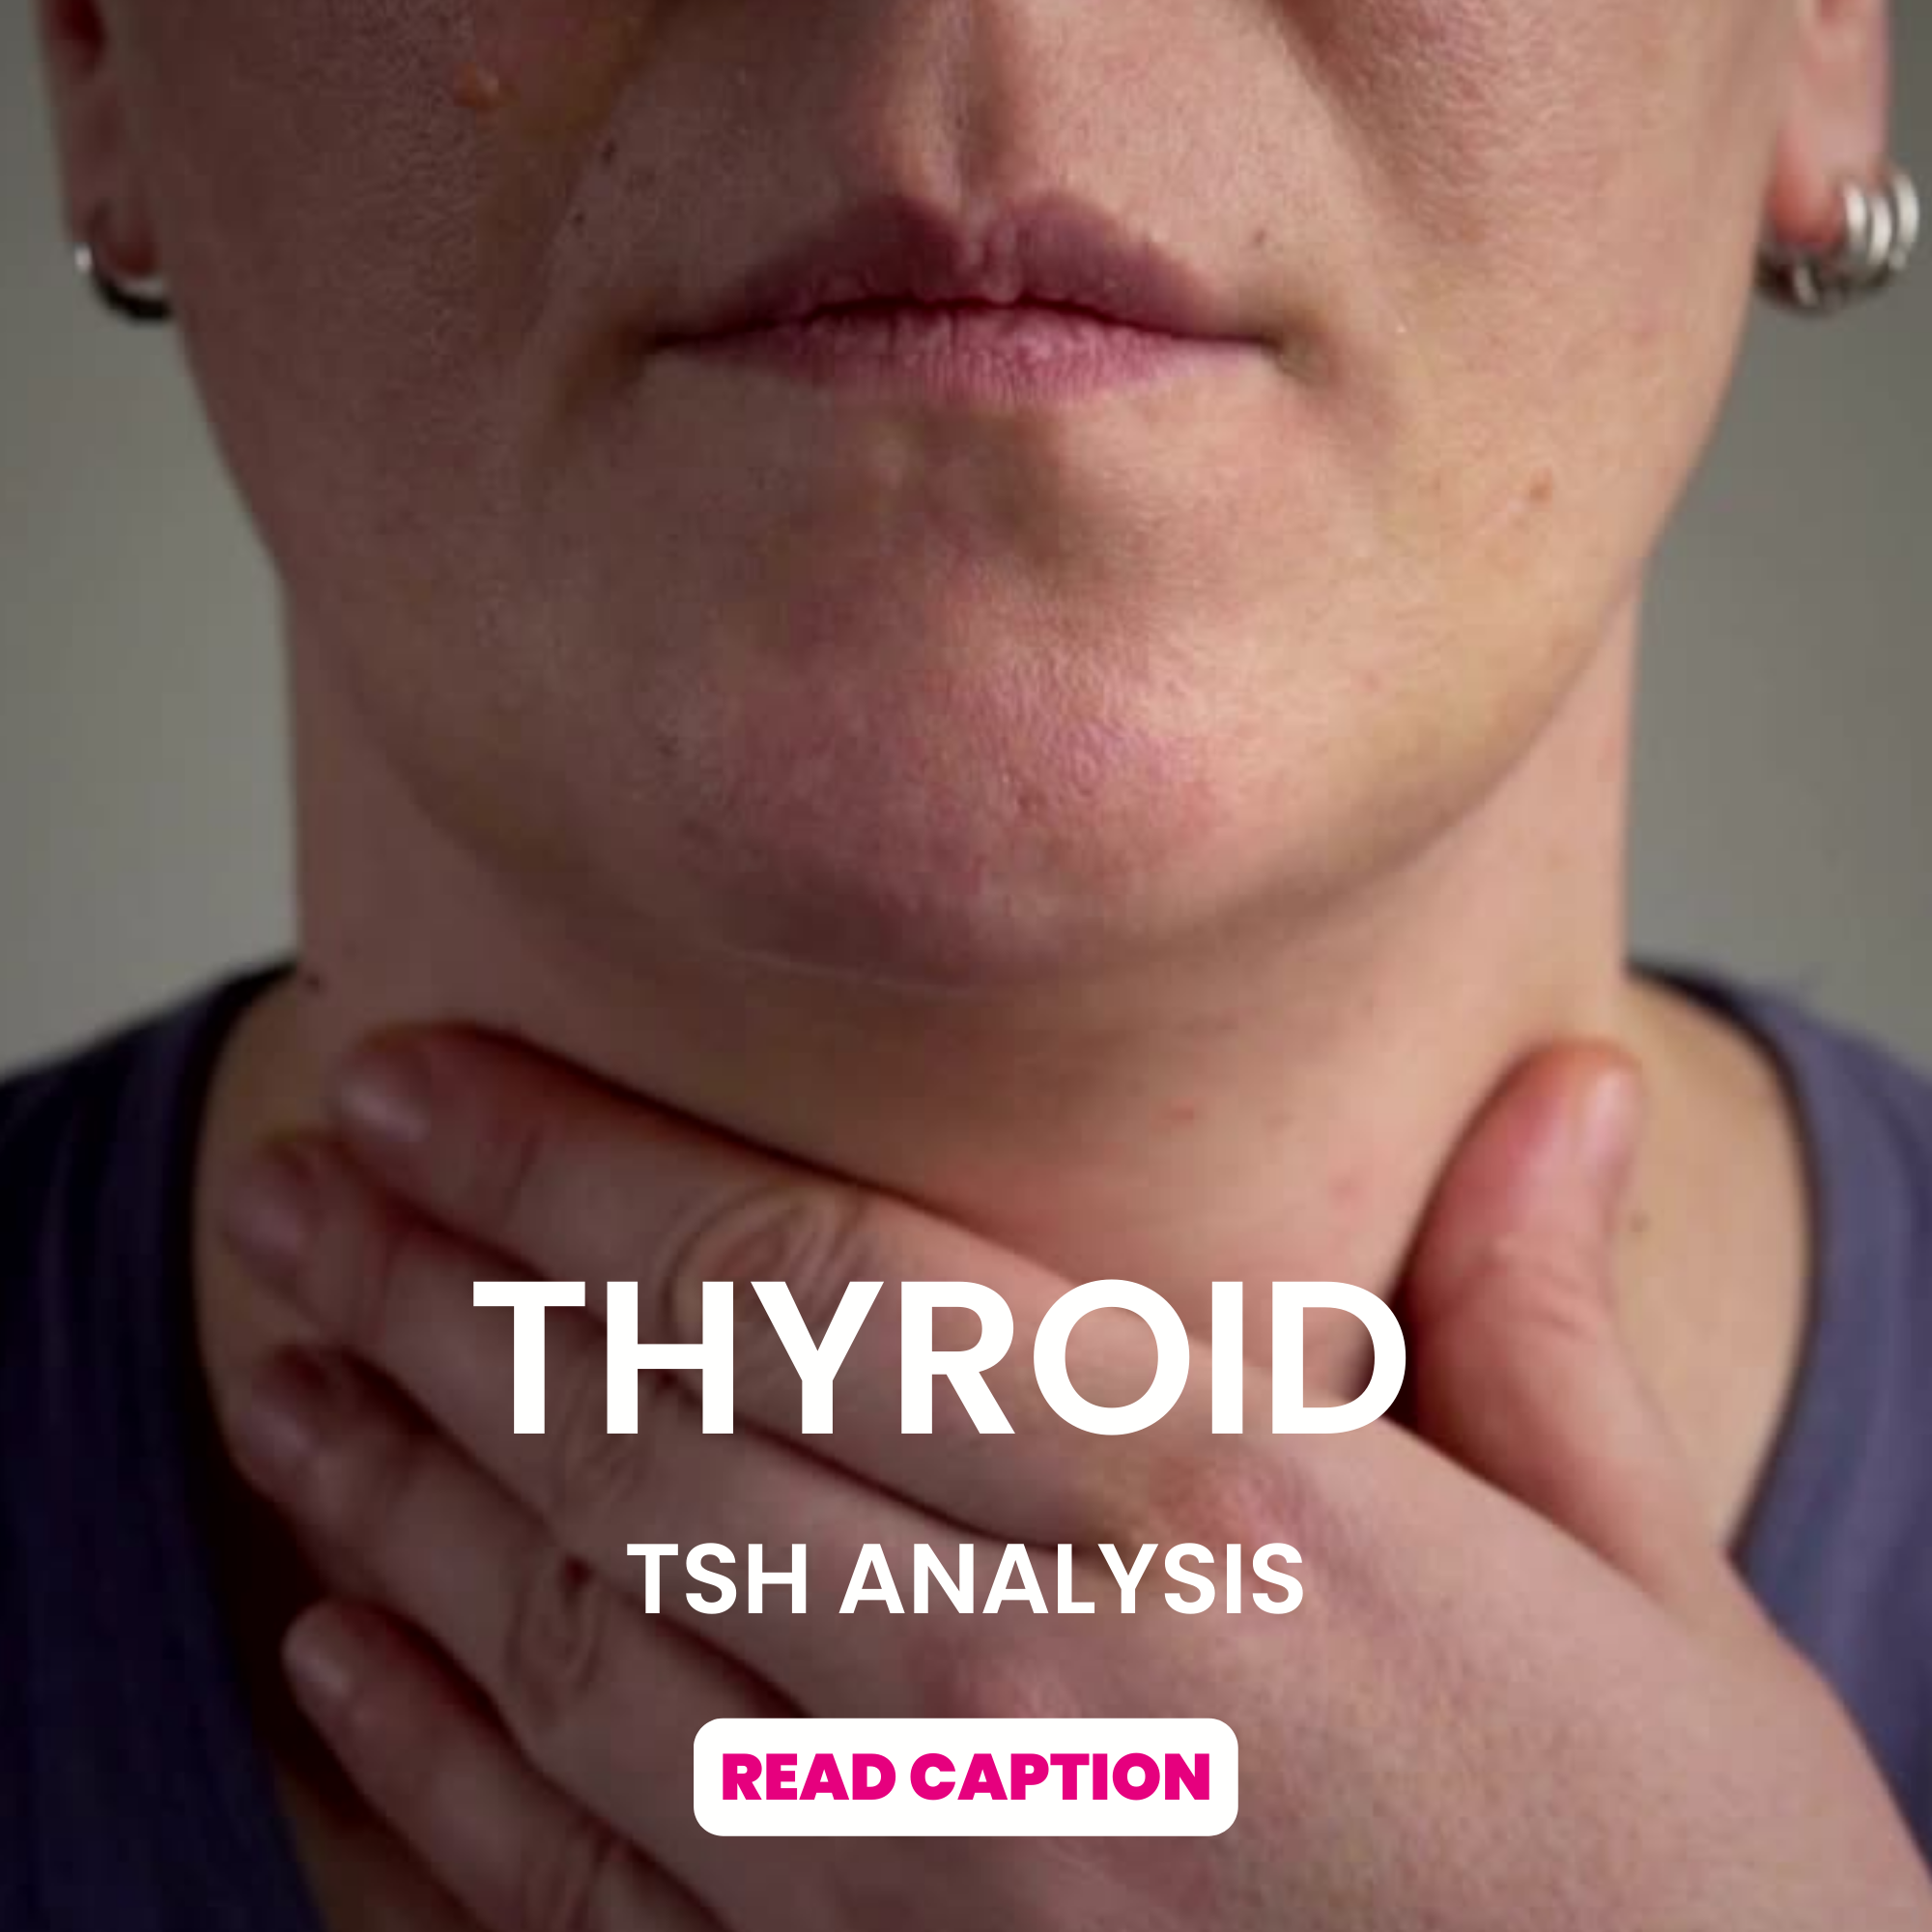 Did you know that women are more likely to have thyroid problems than men?